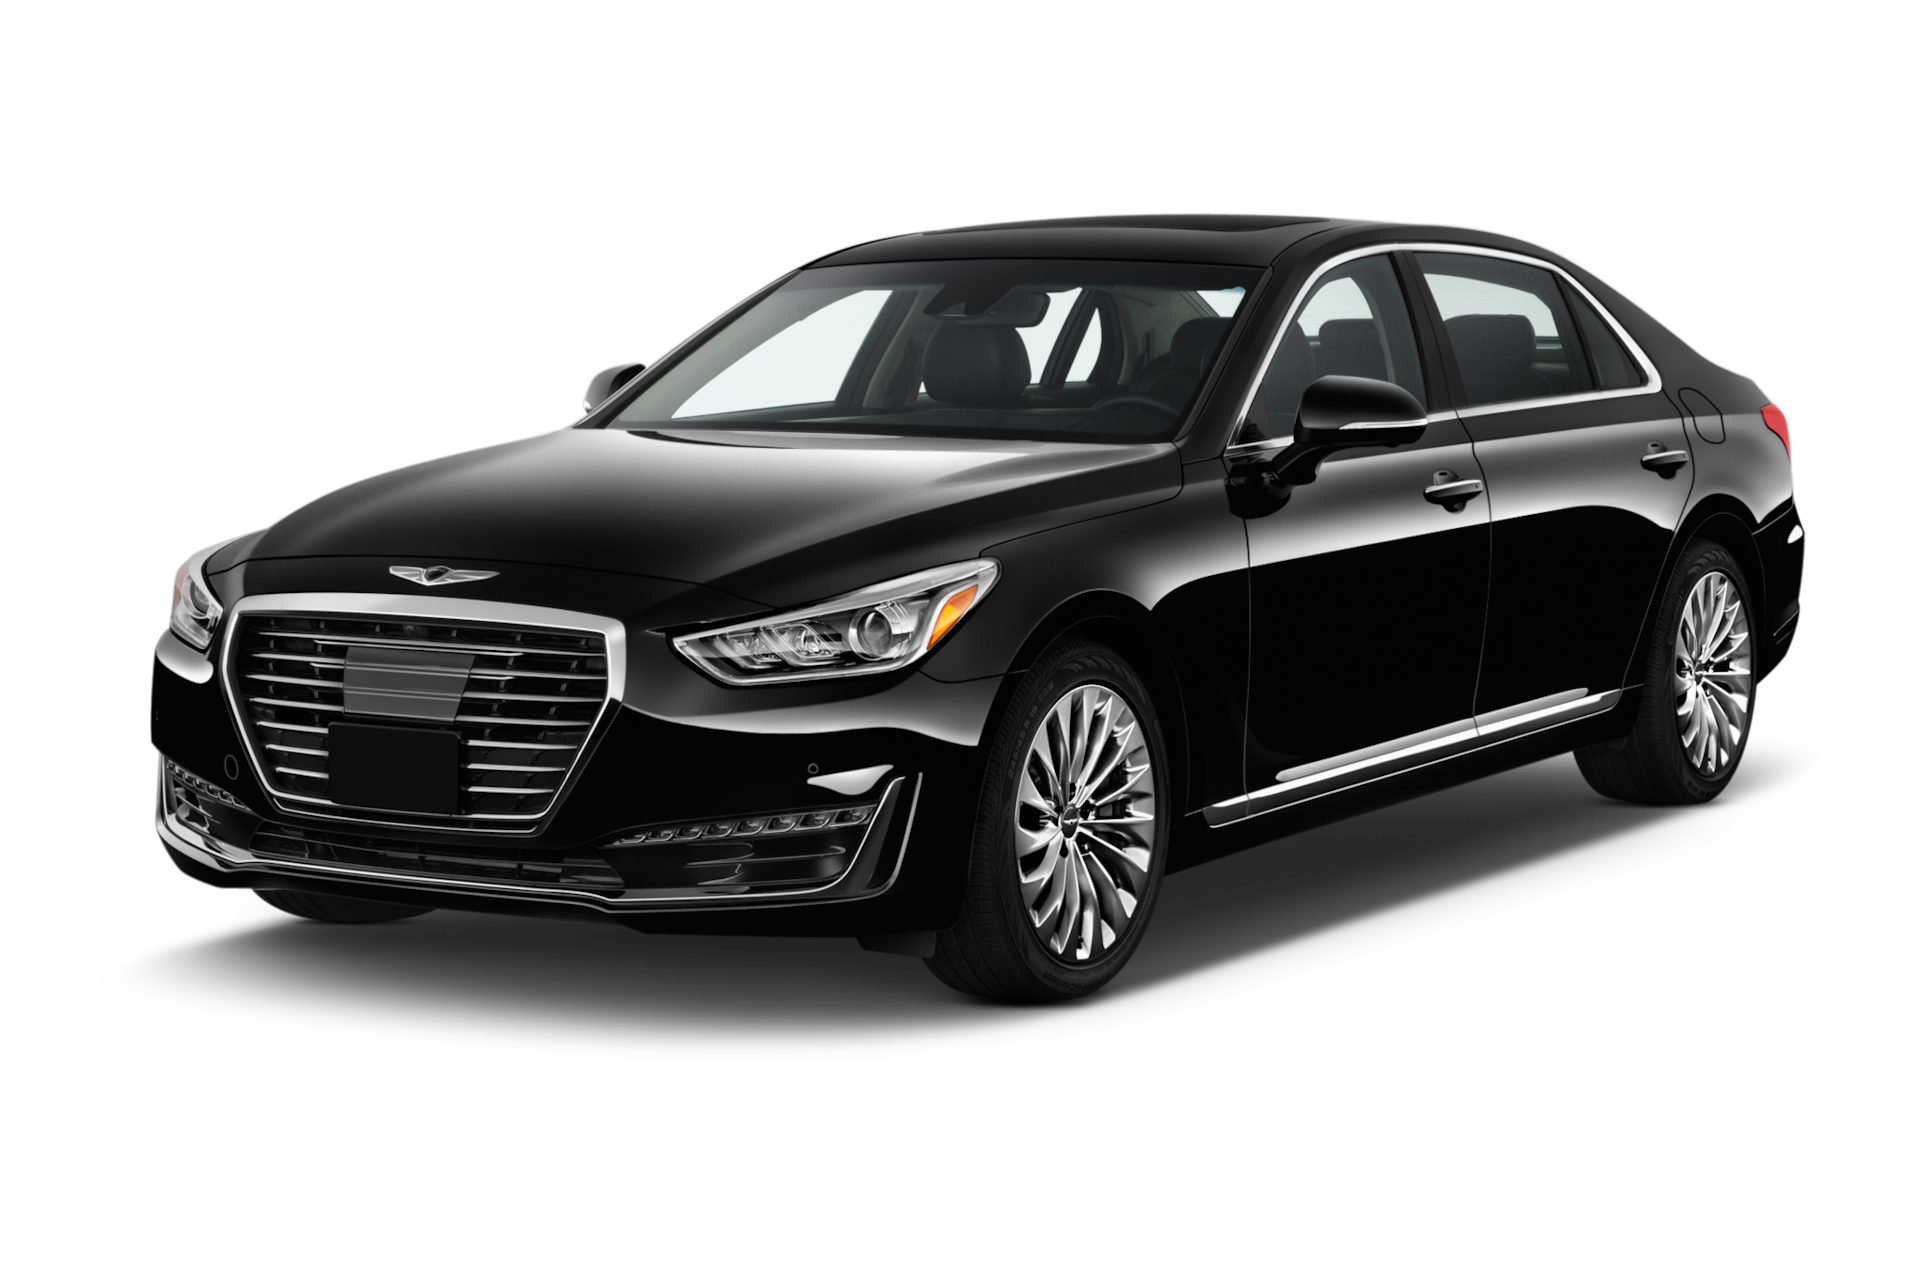 2019 Genesis G90 Prices, Reviews, and Photos - MotorTrend